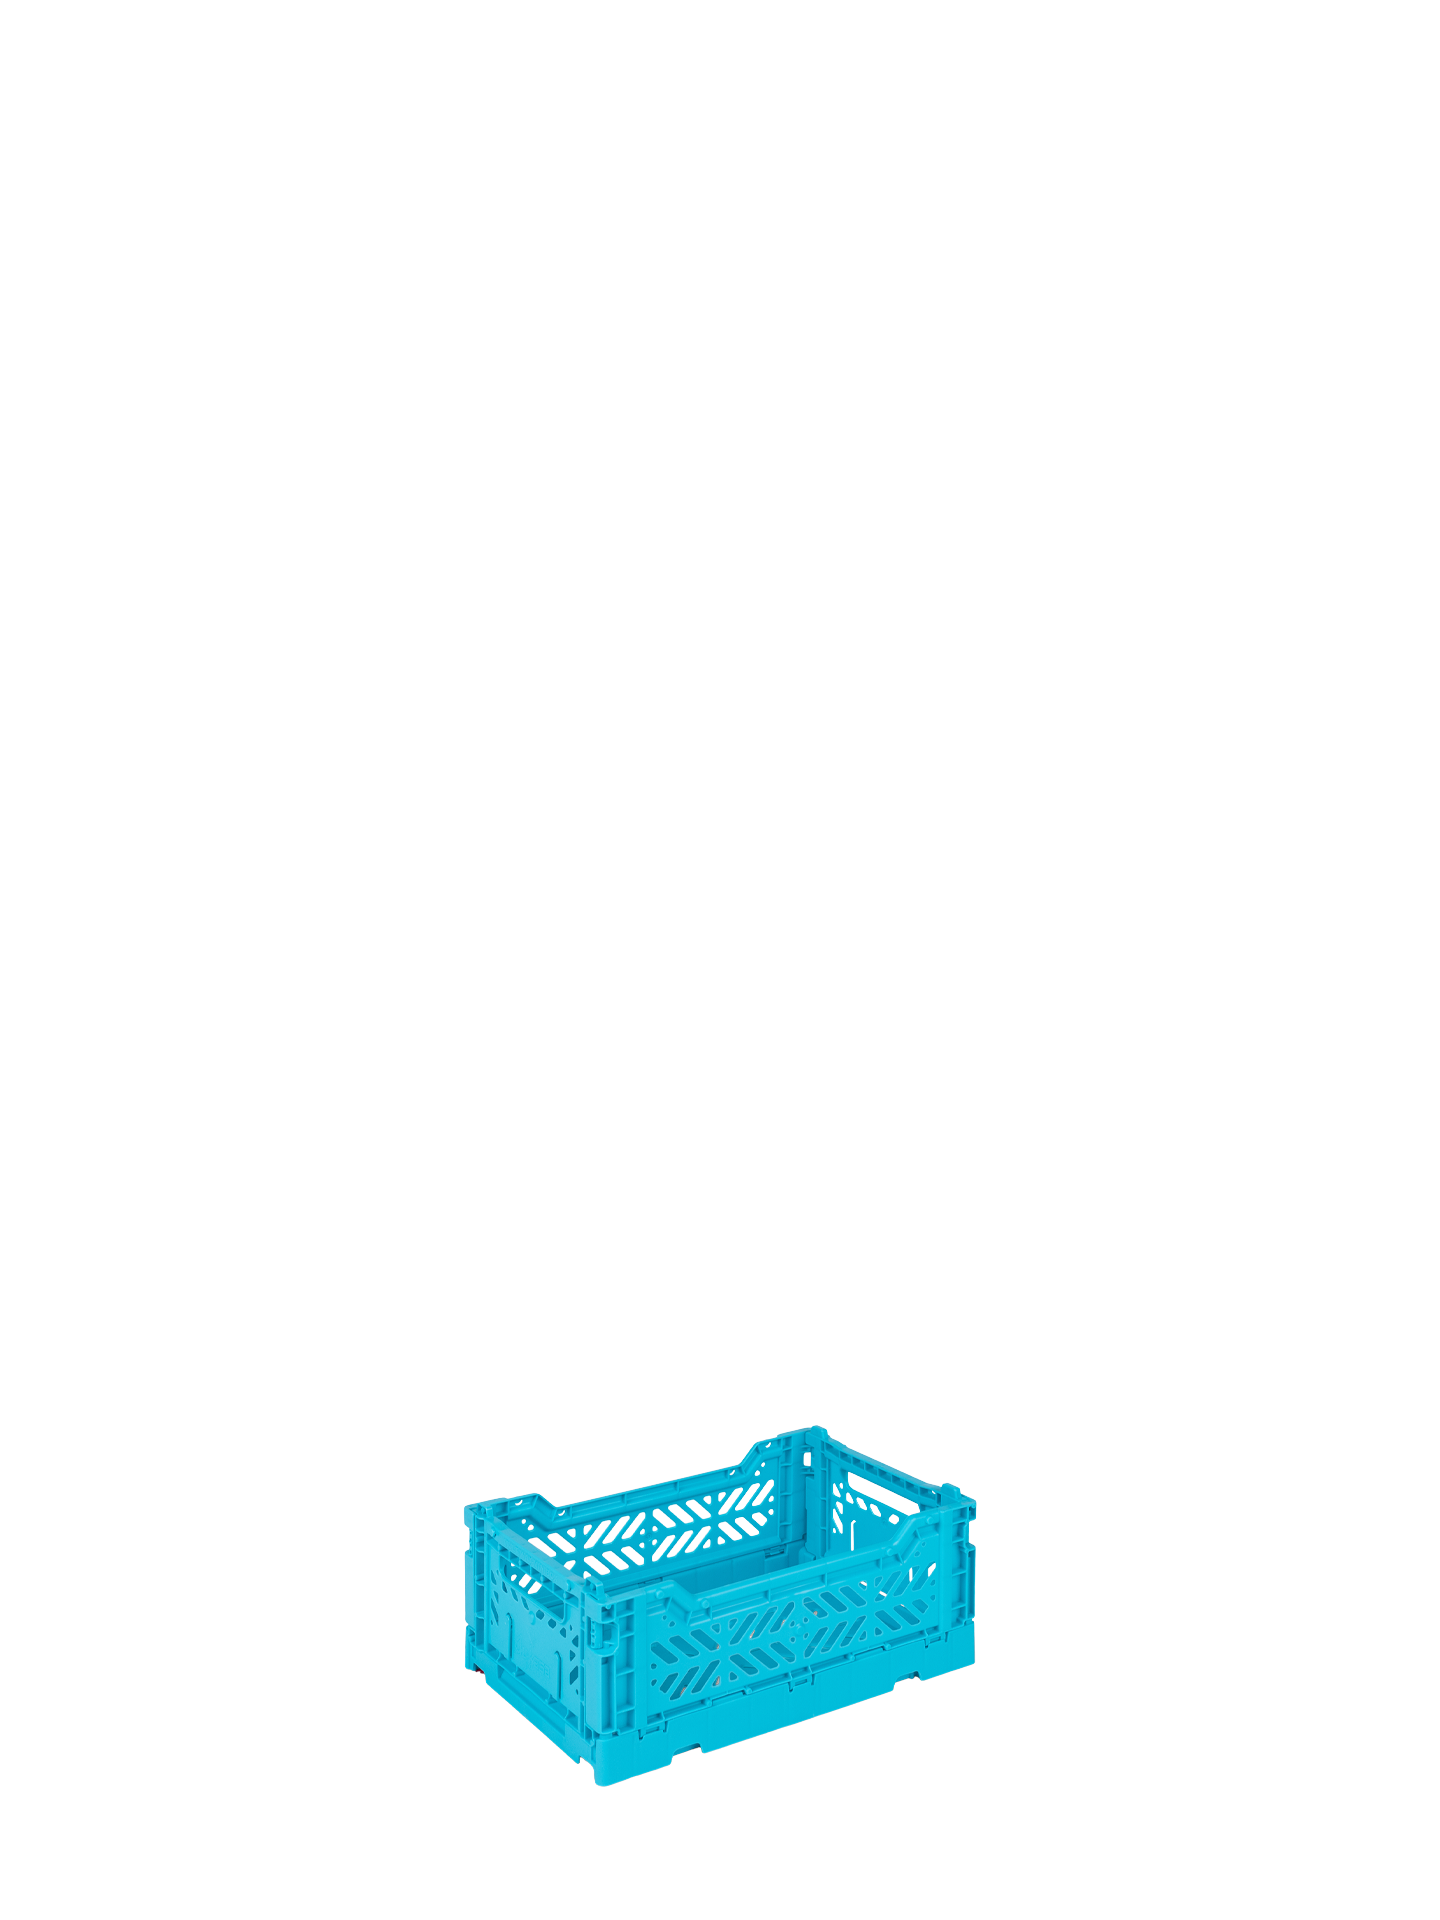 Mini Aykasa crate in turquoise stacks and folds